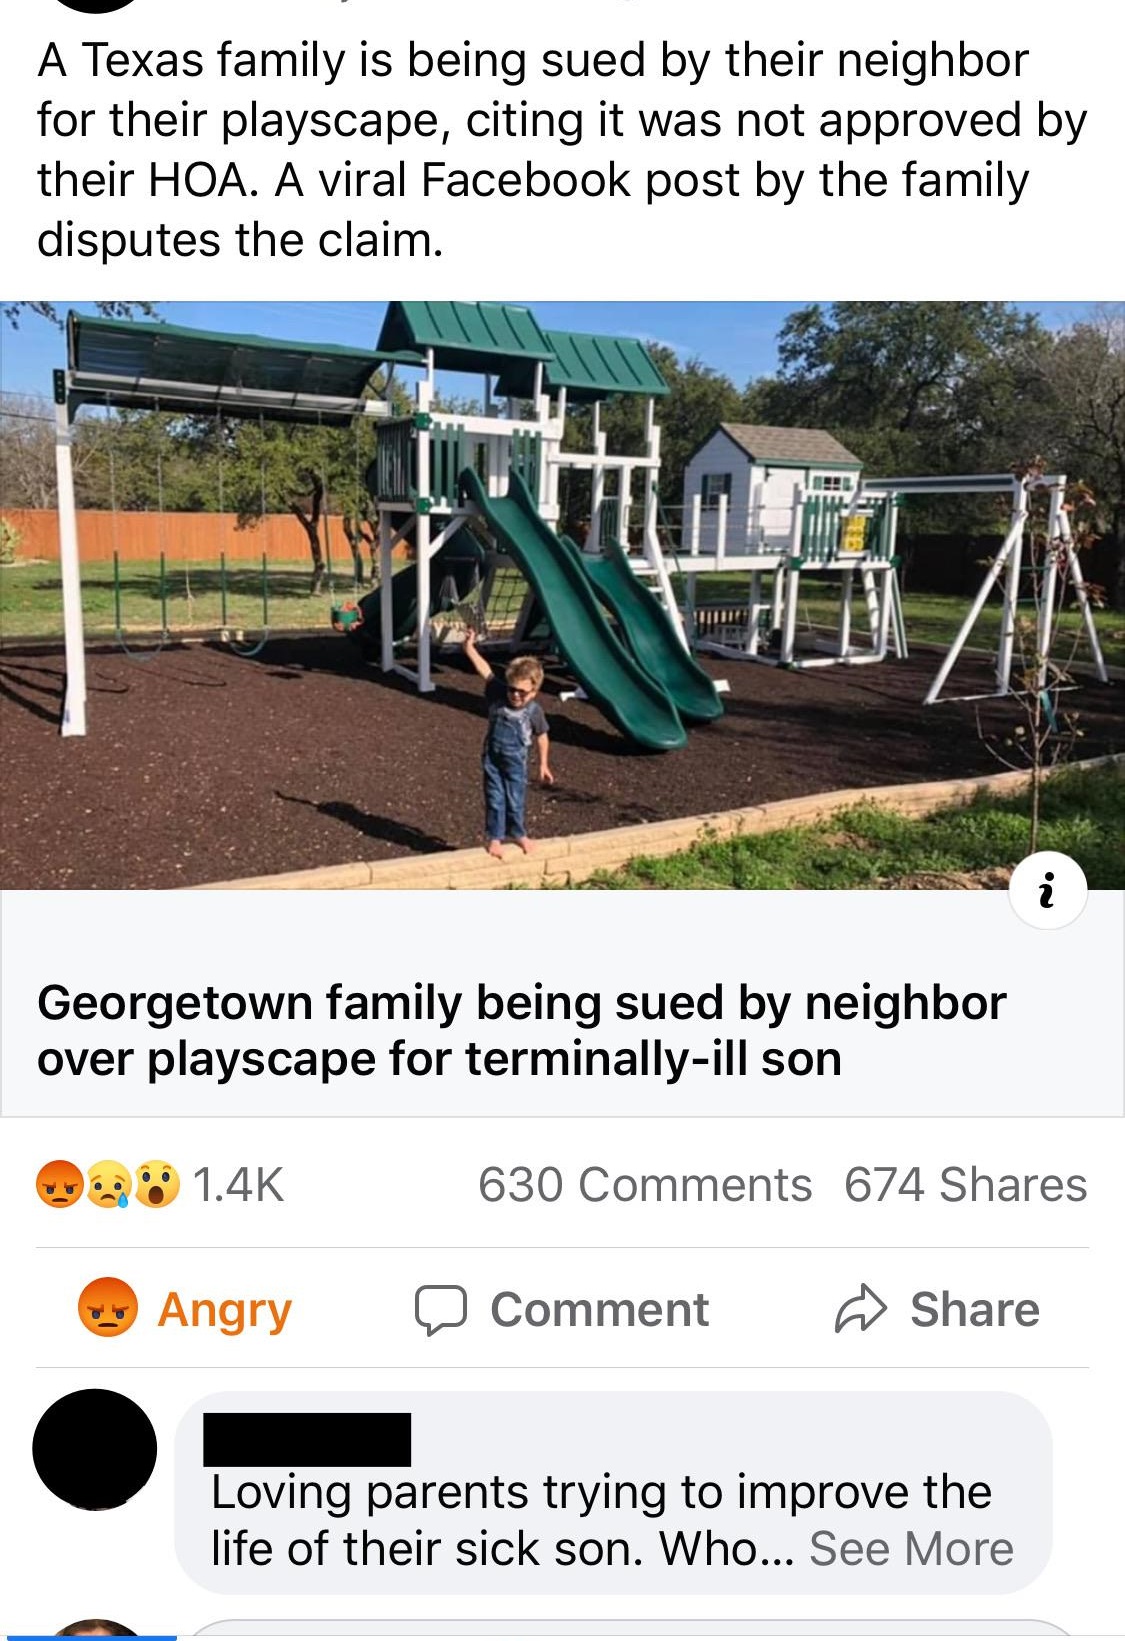 vehicle - A Texas family is being sued by their neighbor for their playscape, citing it was not approved by their Hoa. A viral Facebook post by the family disputes the claim. Georgetown family being sued by neighbor over playscape for terminallyill son 63